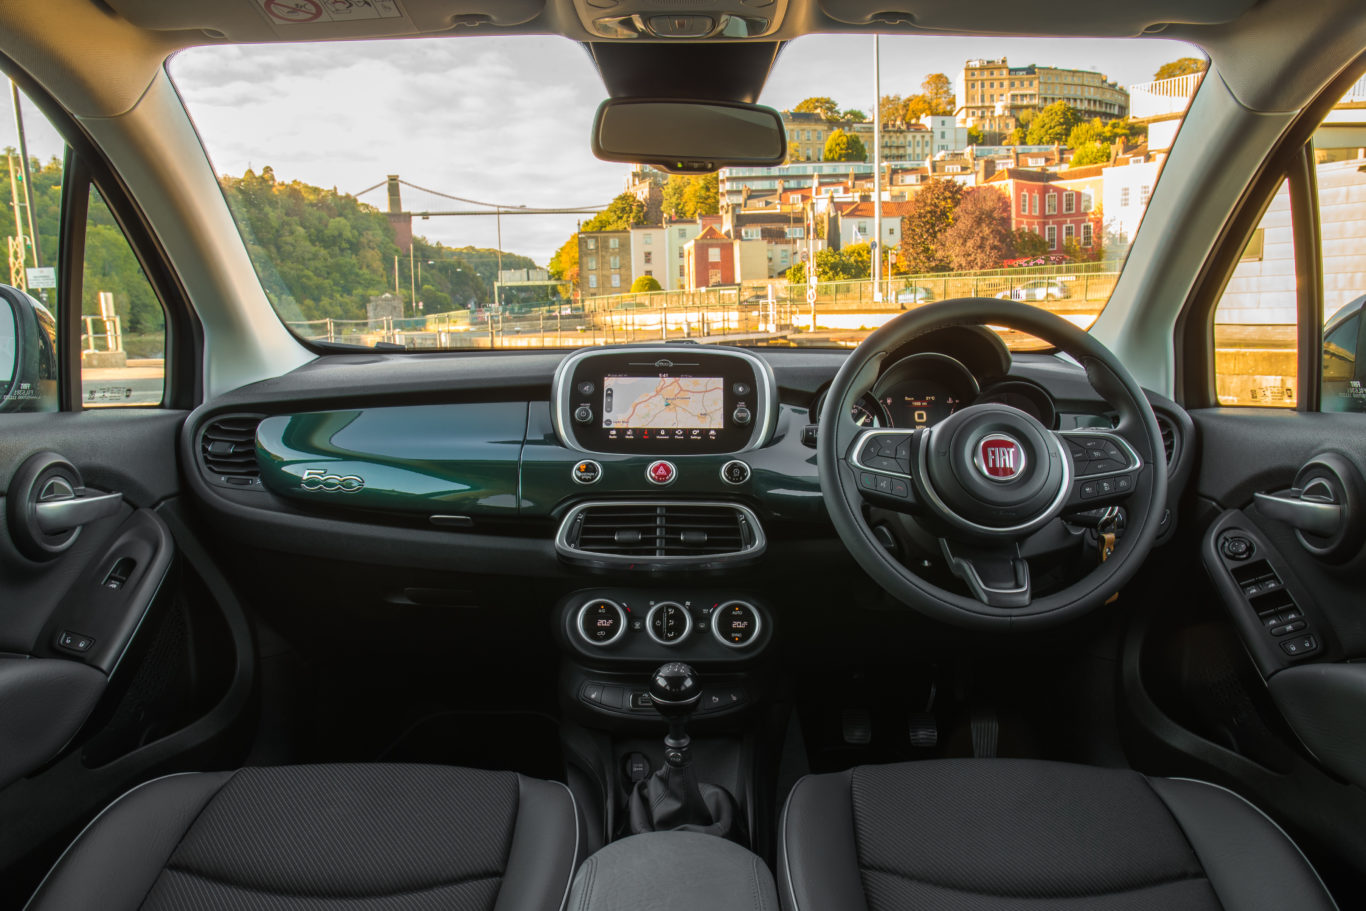 The interior of the 500X features Fiat's latest infotainment system